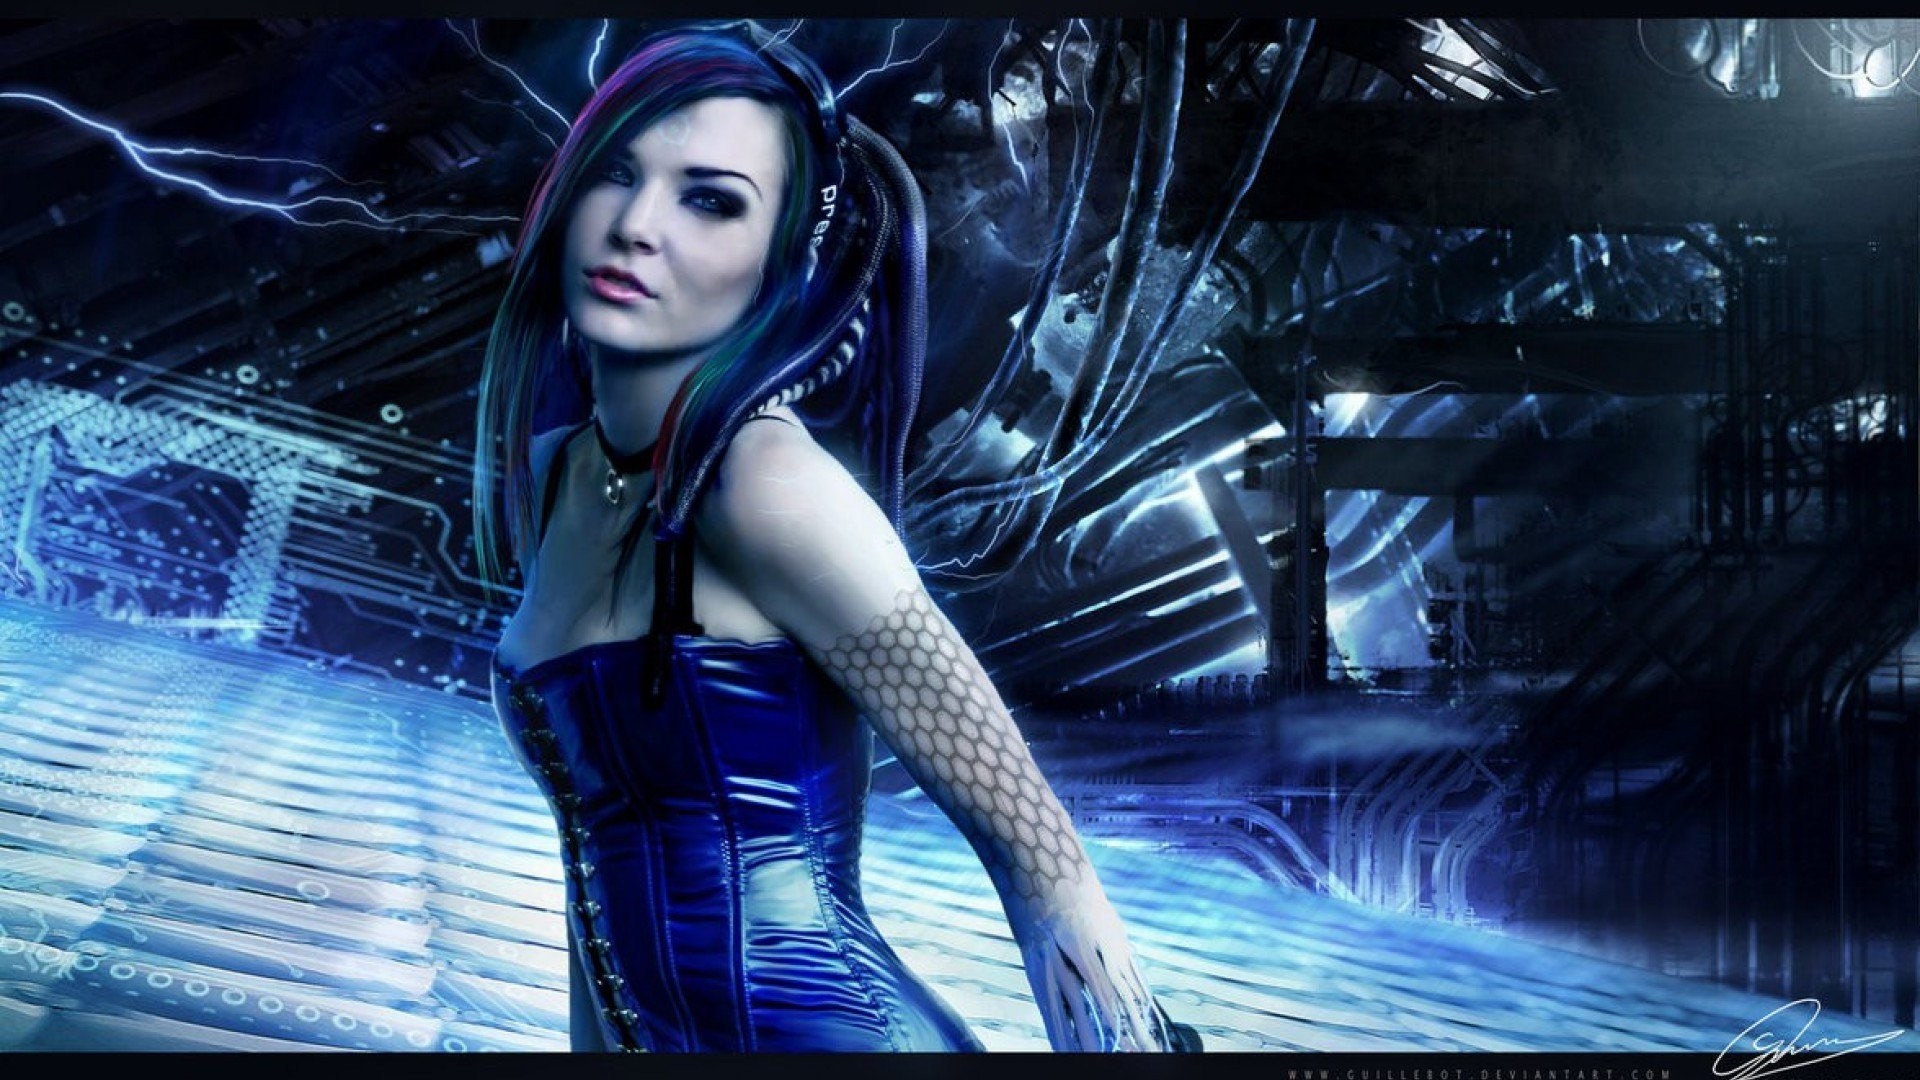 Cyber Goth Wallpaper (77+ images)